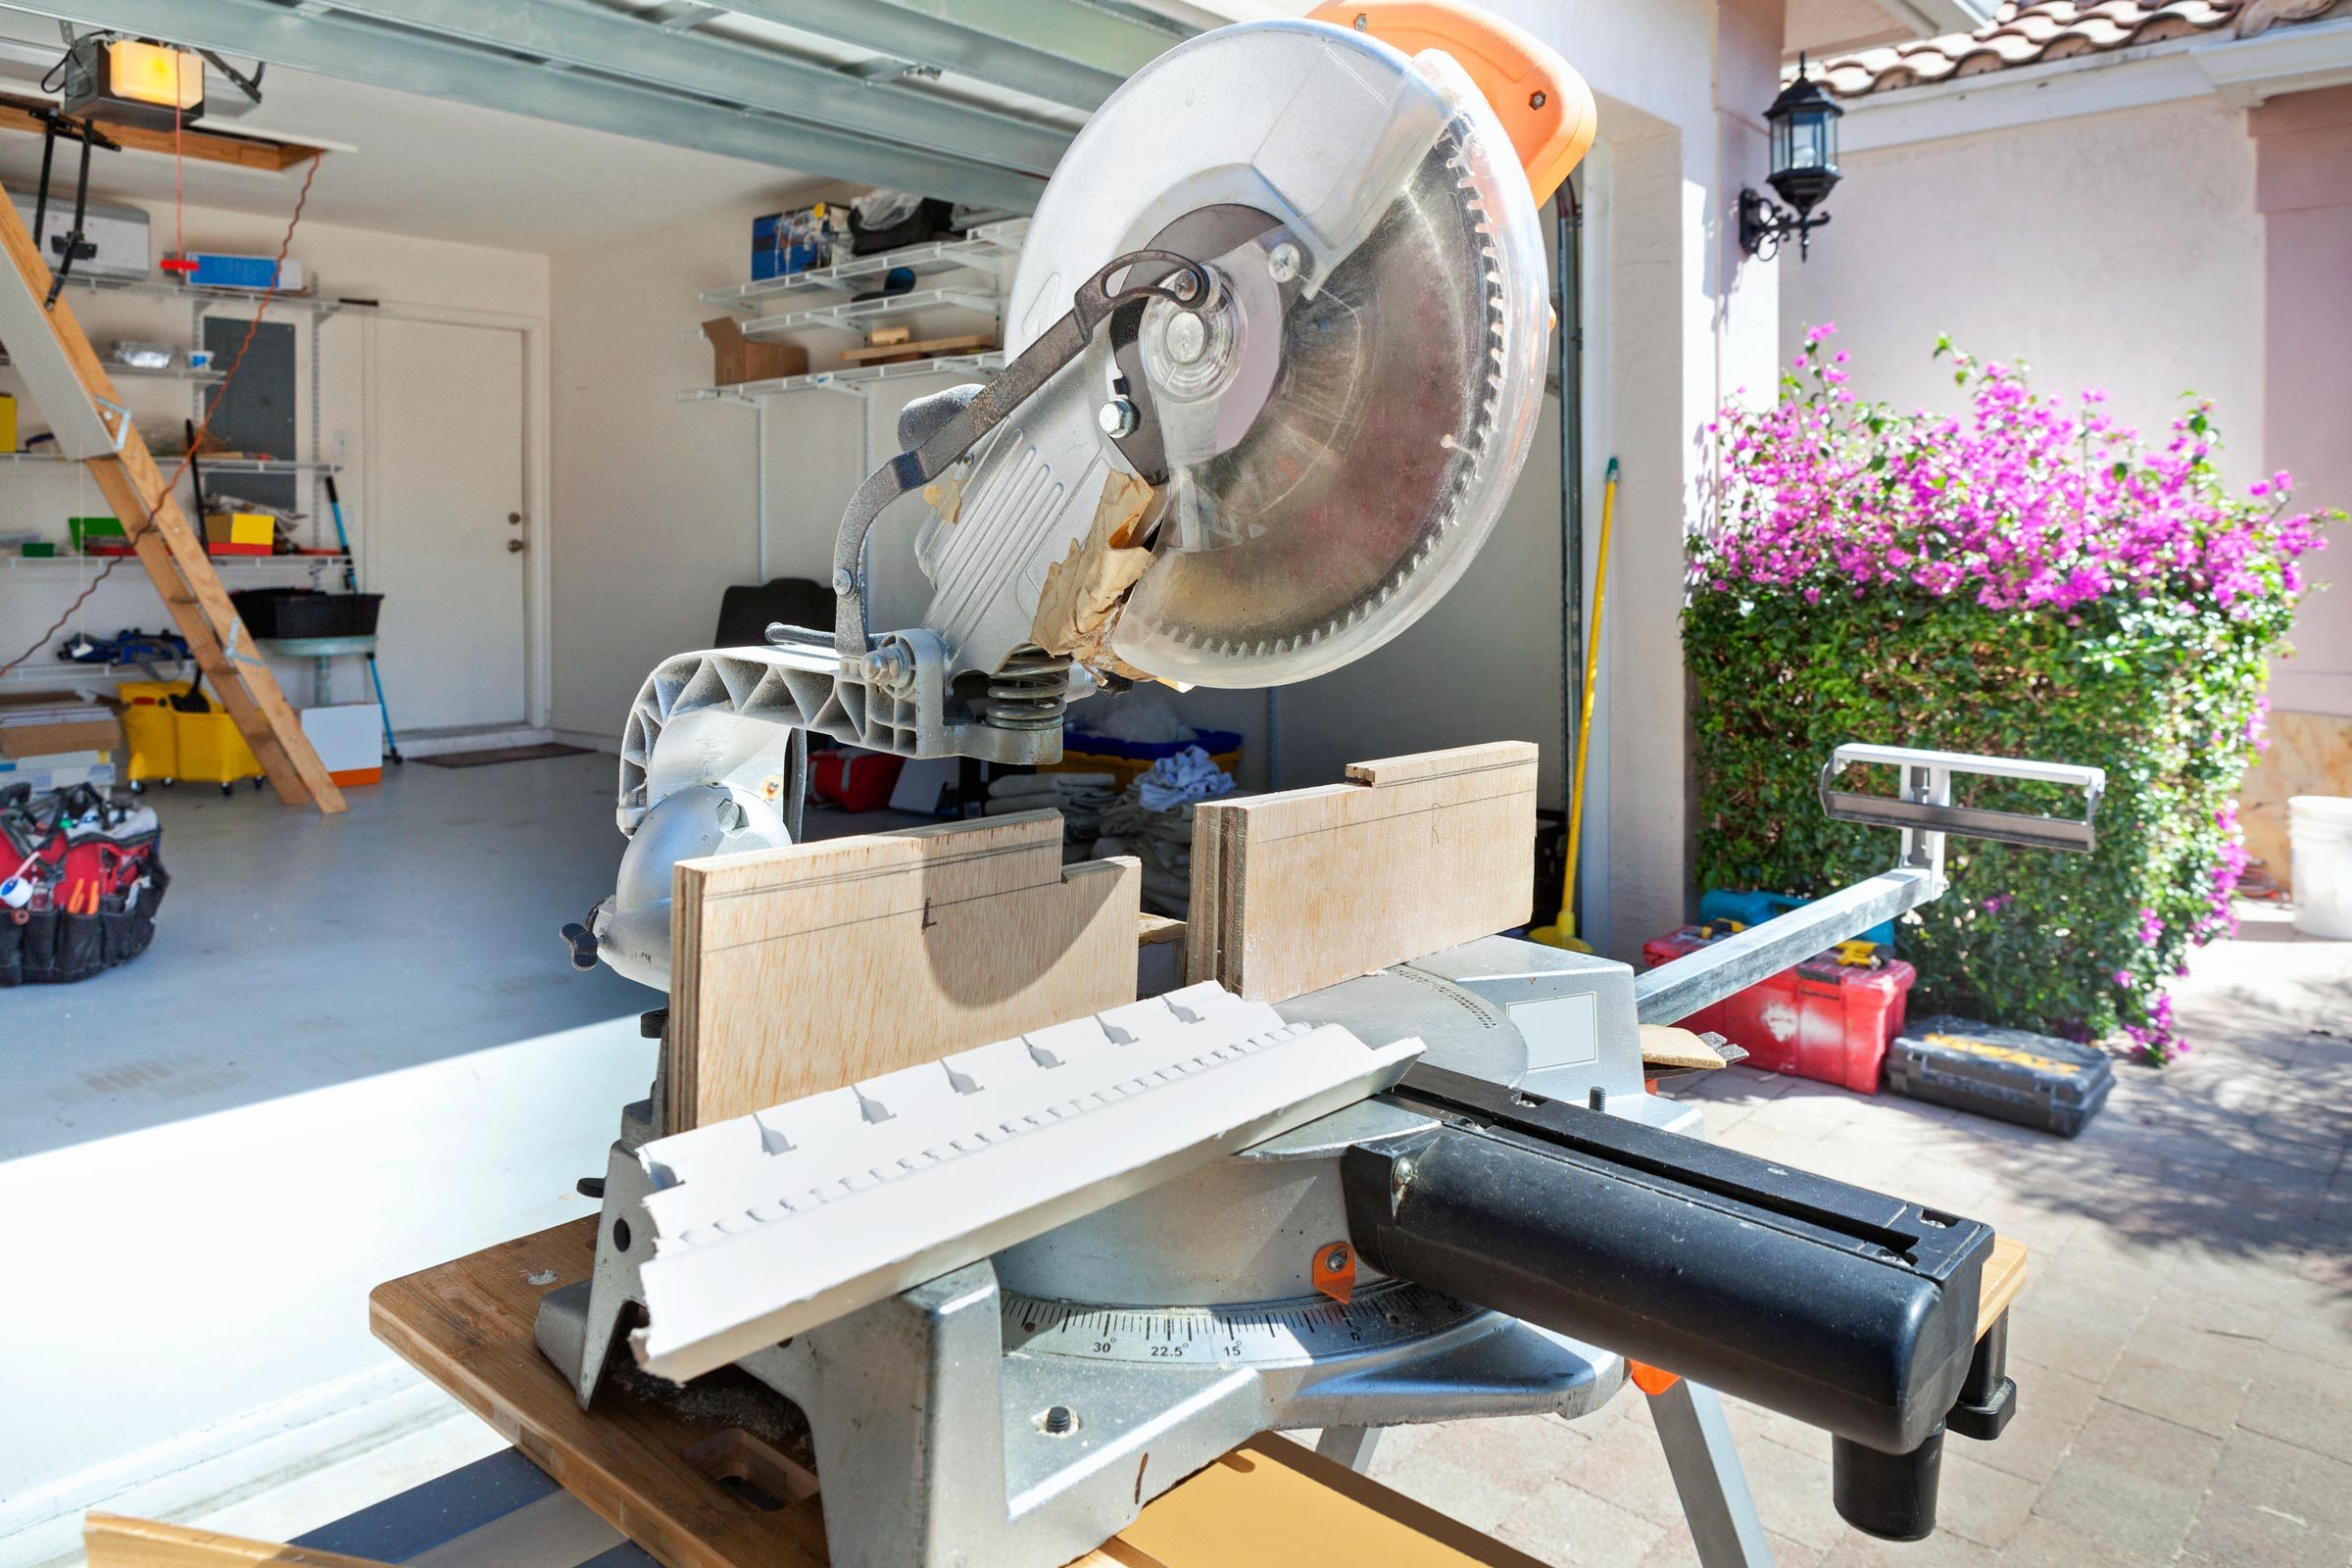 Make Perfect Cuts With Your Miter Saw